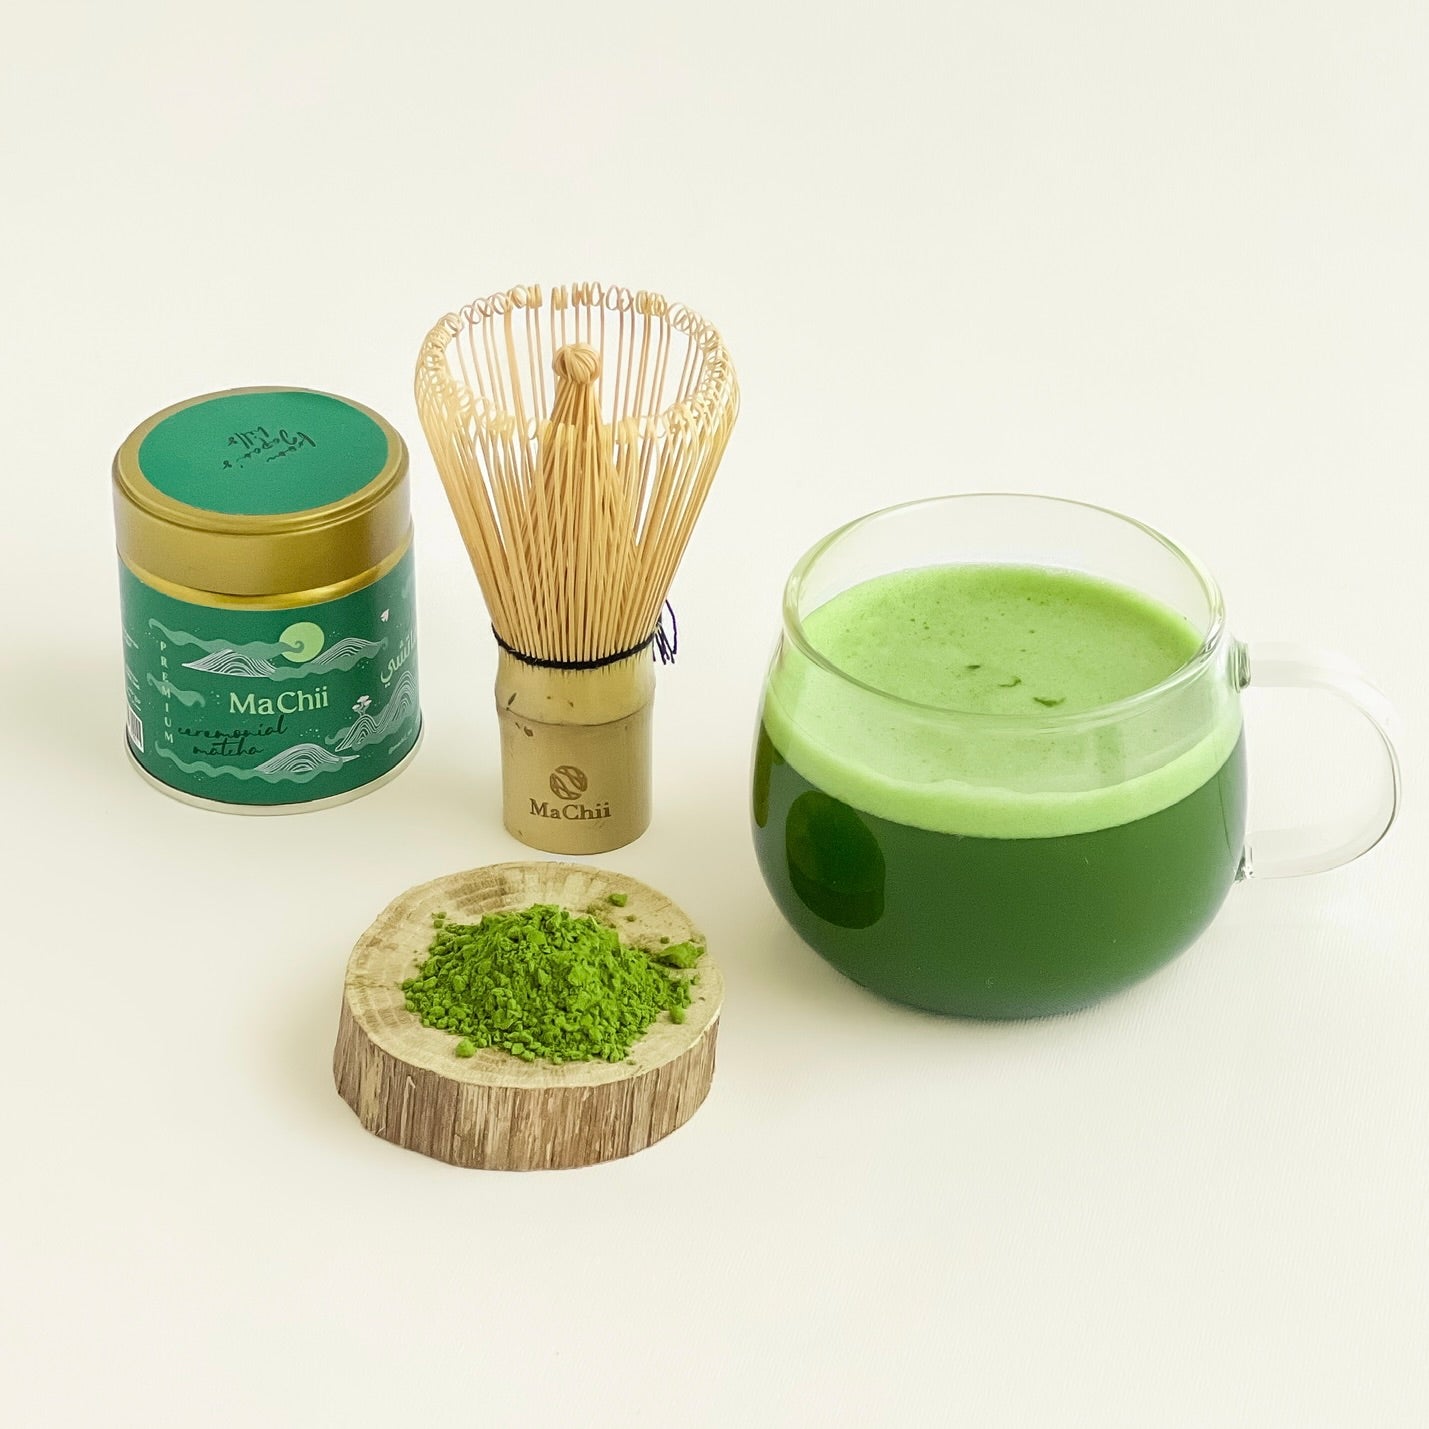 ceremonial matcha premium with a matcha whisk and a cup of traditional matcha. powder on the side of the cup. machii tea logo